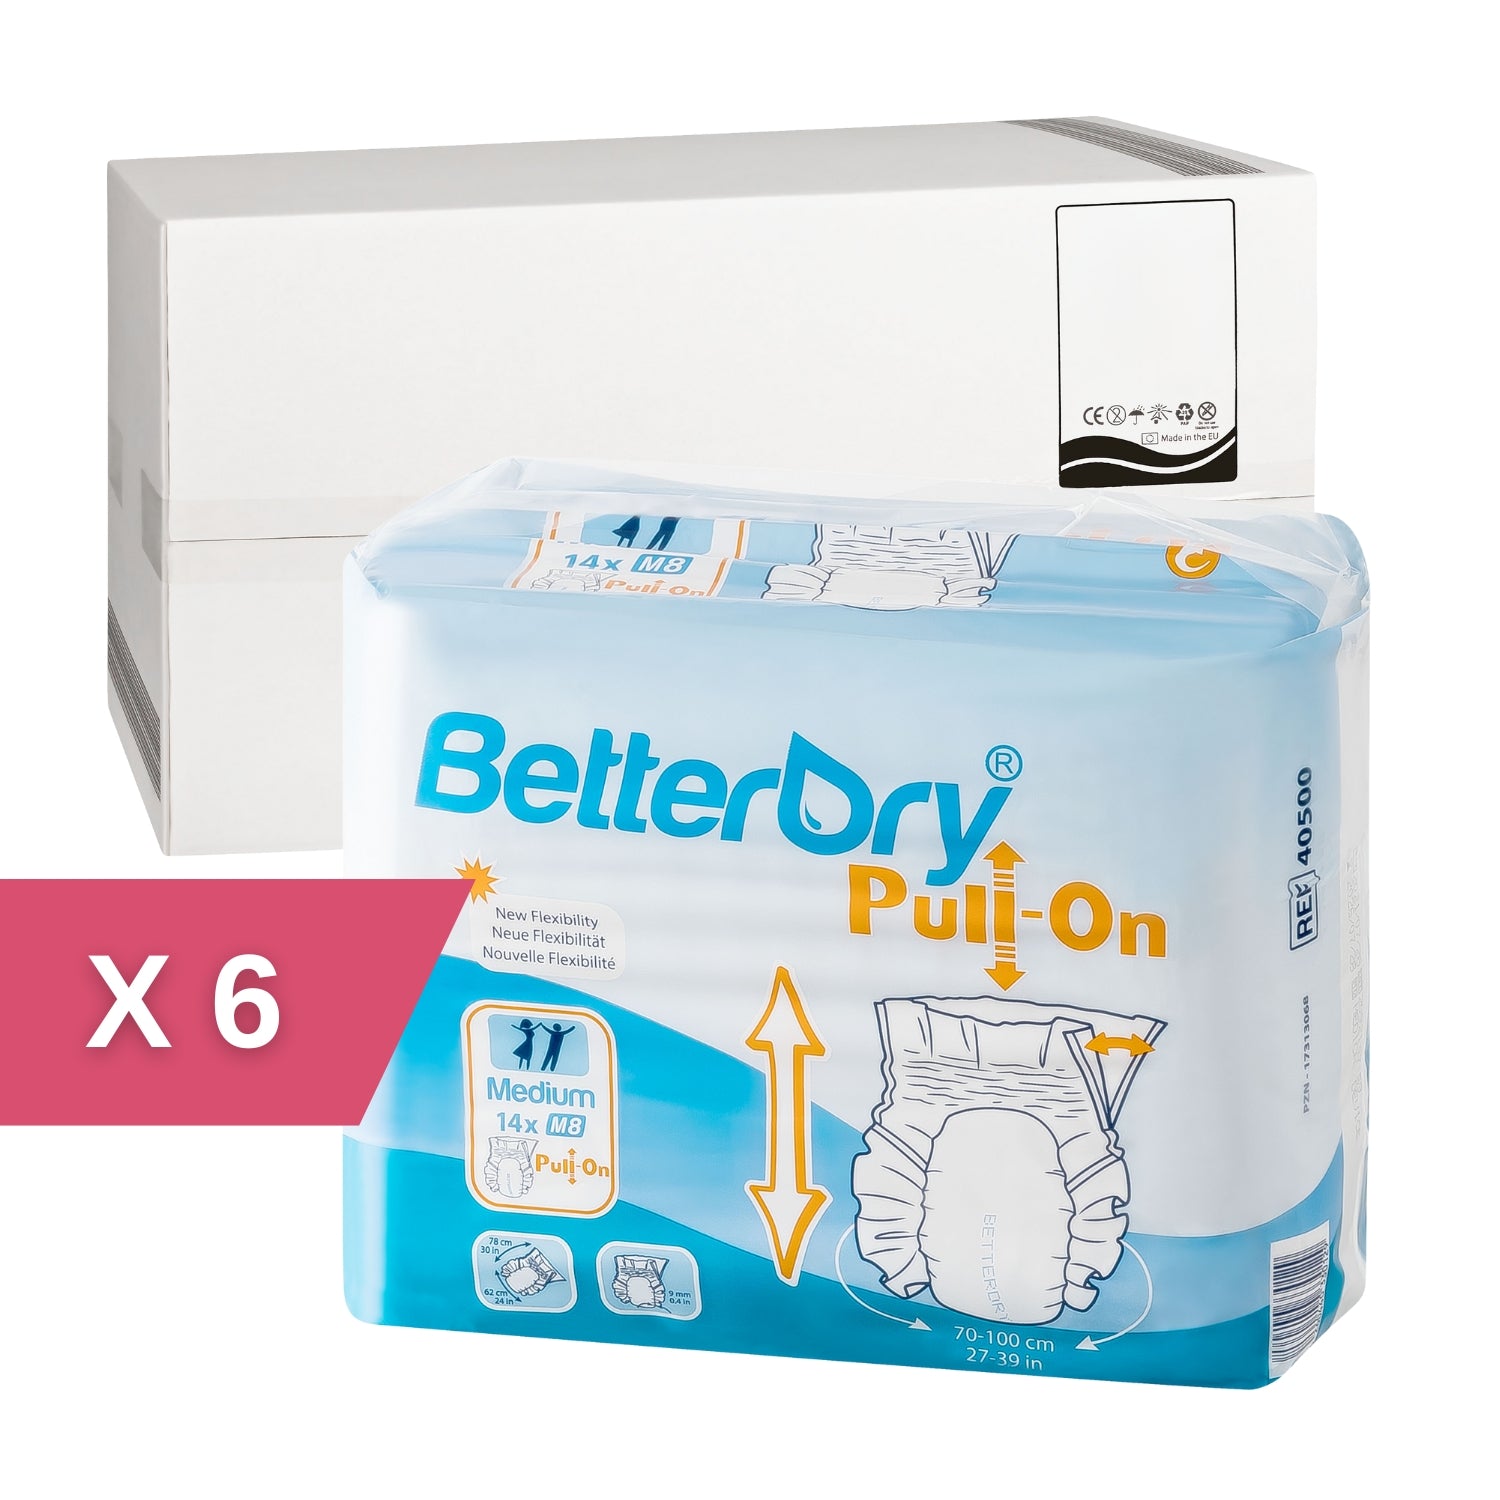 BetterDry 8 PULL-ON - Adult Diapers